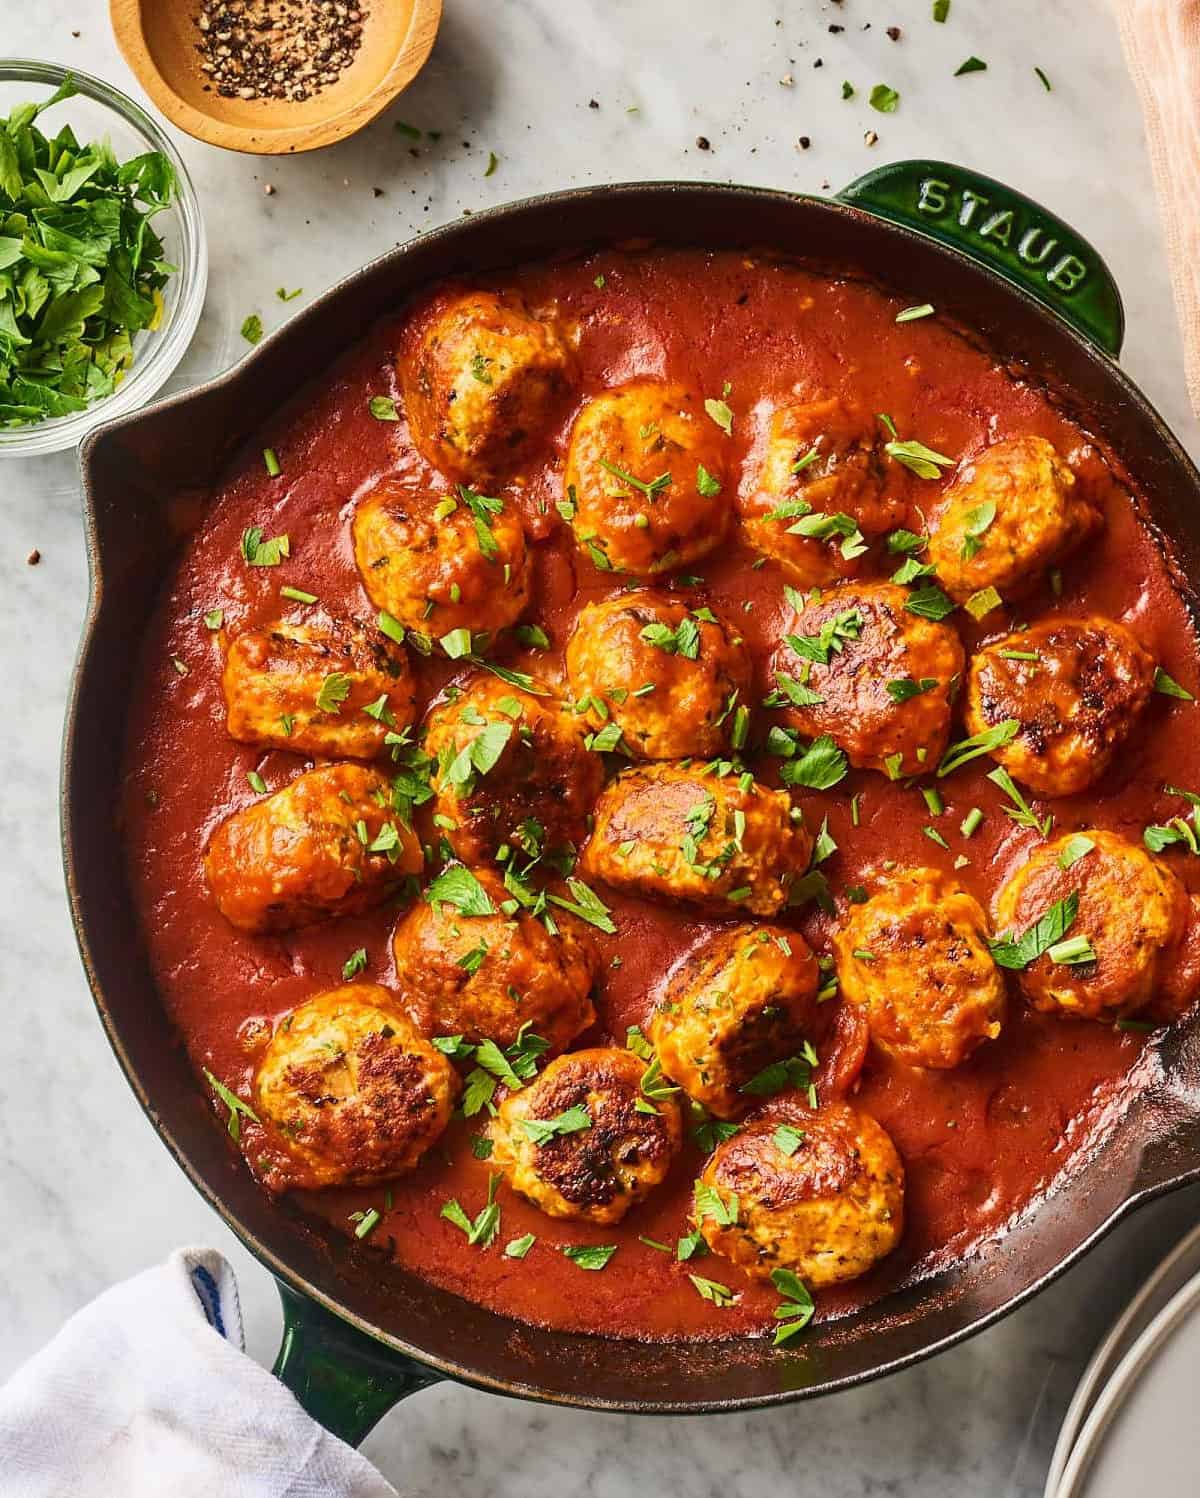  Who says turkey meatballs can't be the star of the show? These are both stunning and scrumptious.